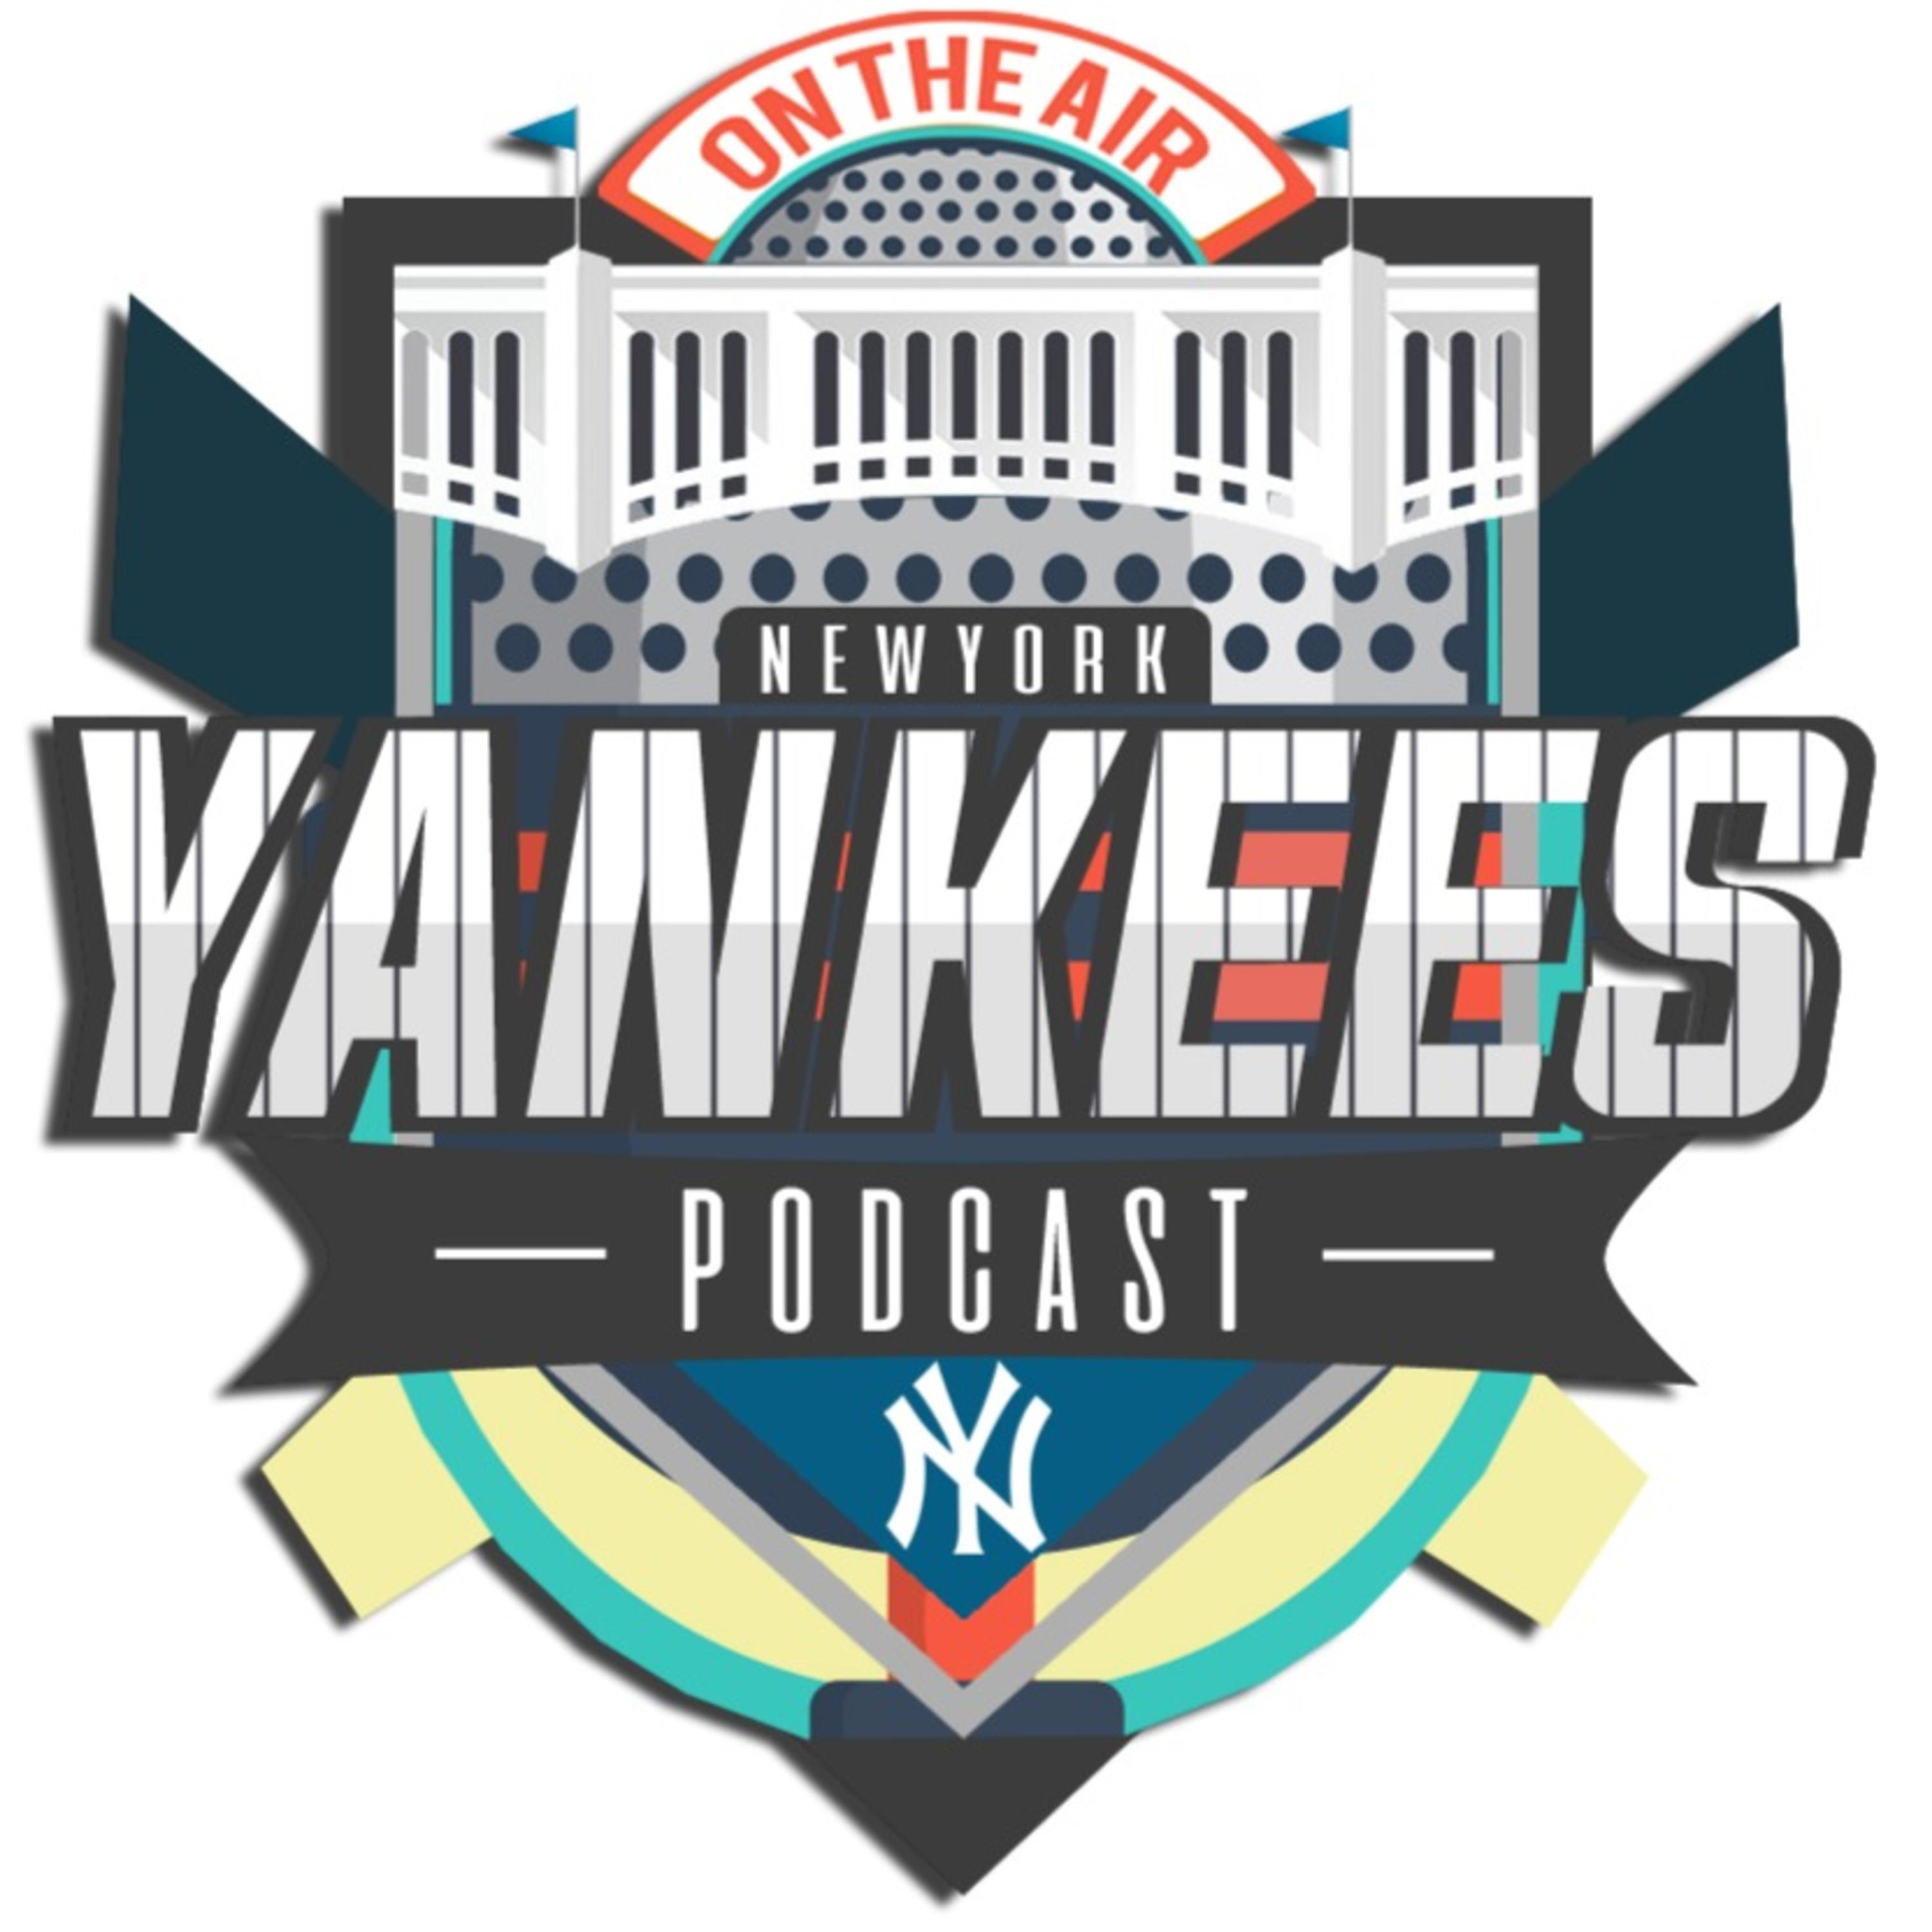 New York Yankees Hungary Podcast - Bé x DS! x Mike - S02EP27